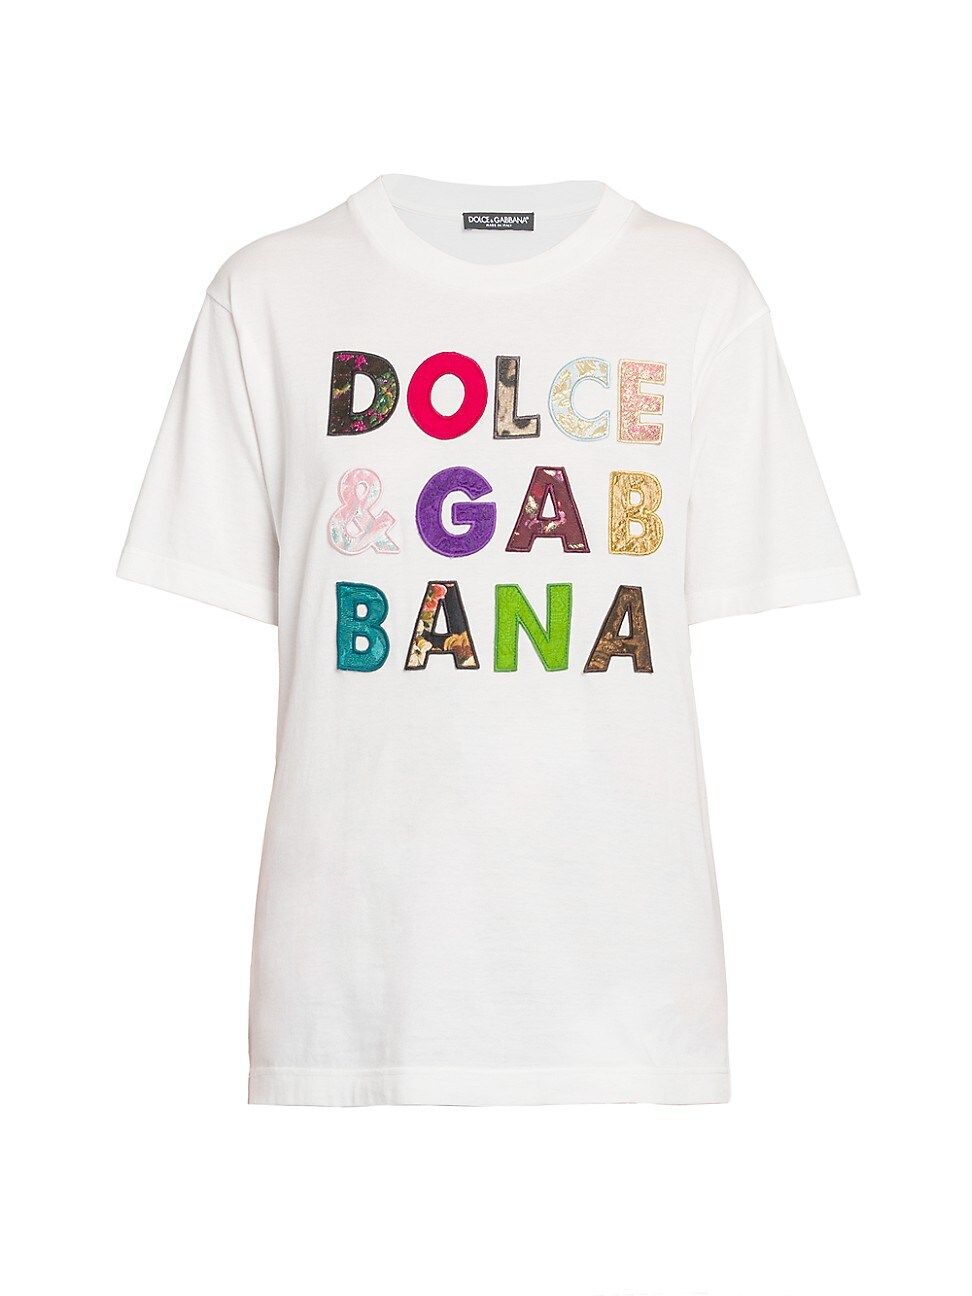 DOLCE & GABBANA Women's D & G Oversize Embroidered T-Shirt - Bianco - Size 2 | Saks Fifth Avenue